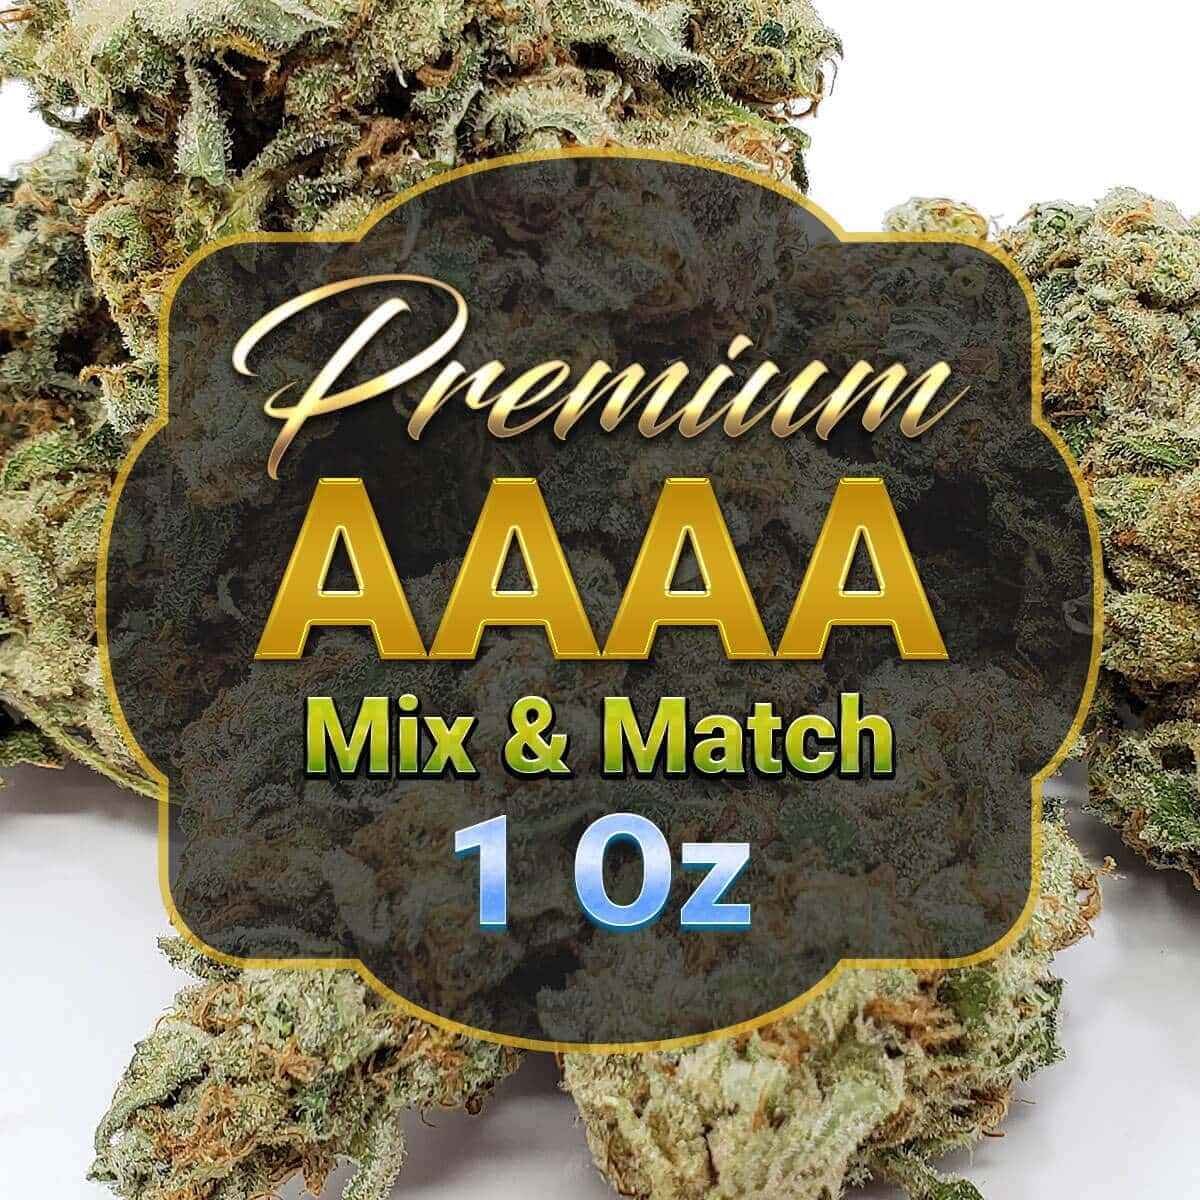 Premium AAAA Mix And Match - Ounce